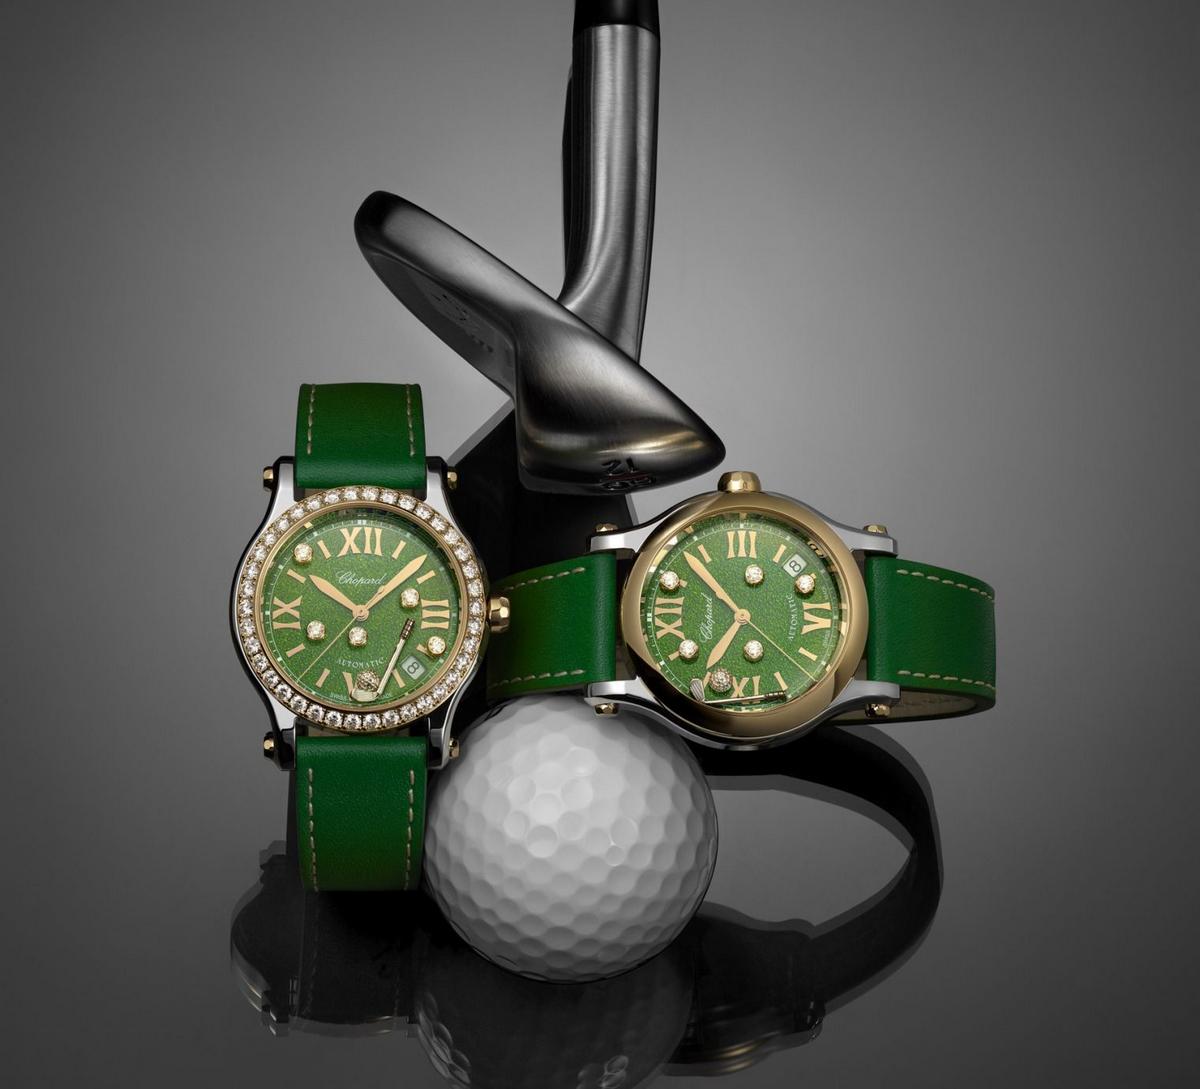 The new Chopard golf watch comes with diamond ?balls? that move across the green